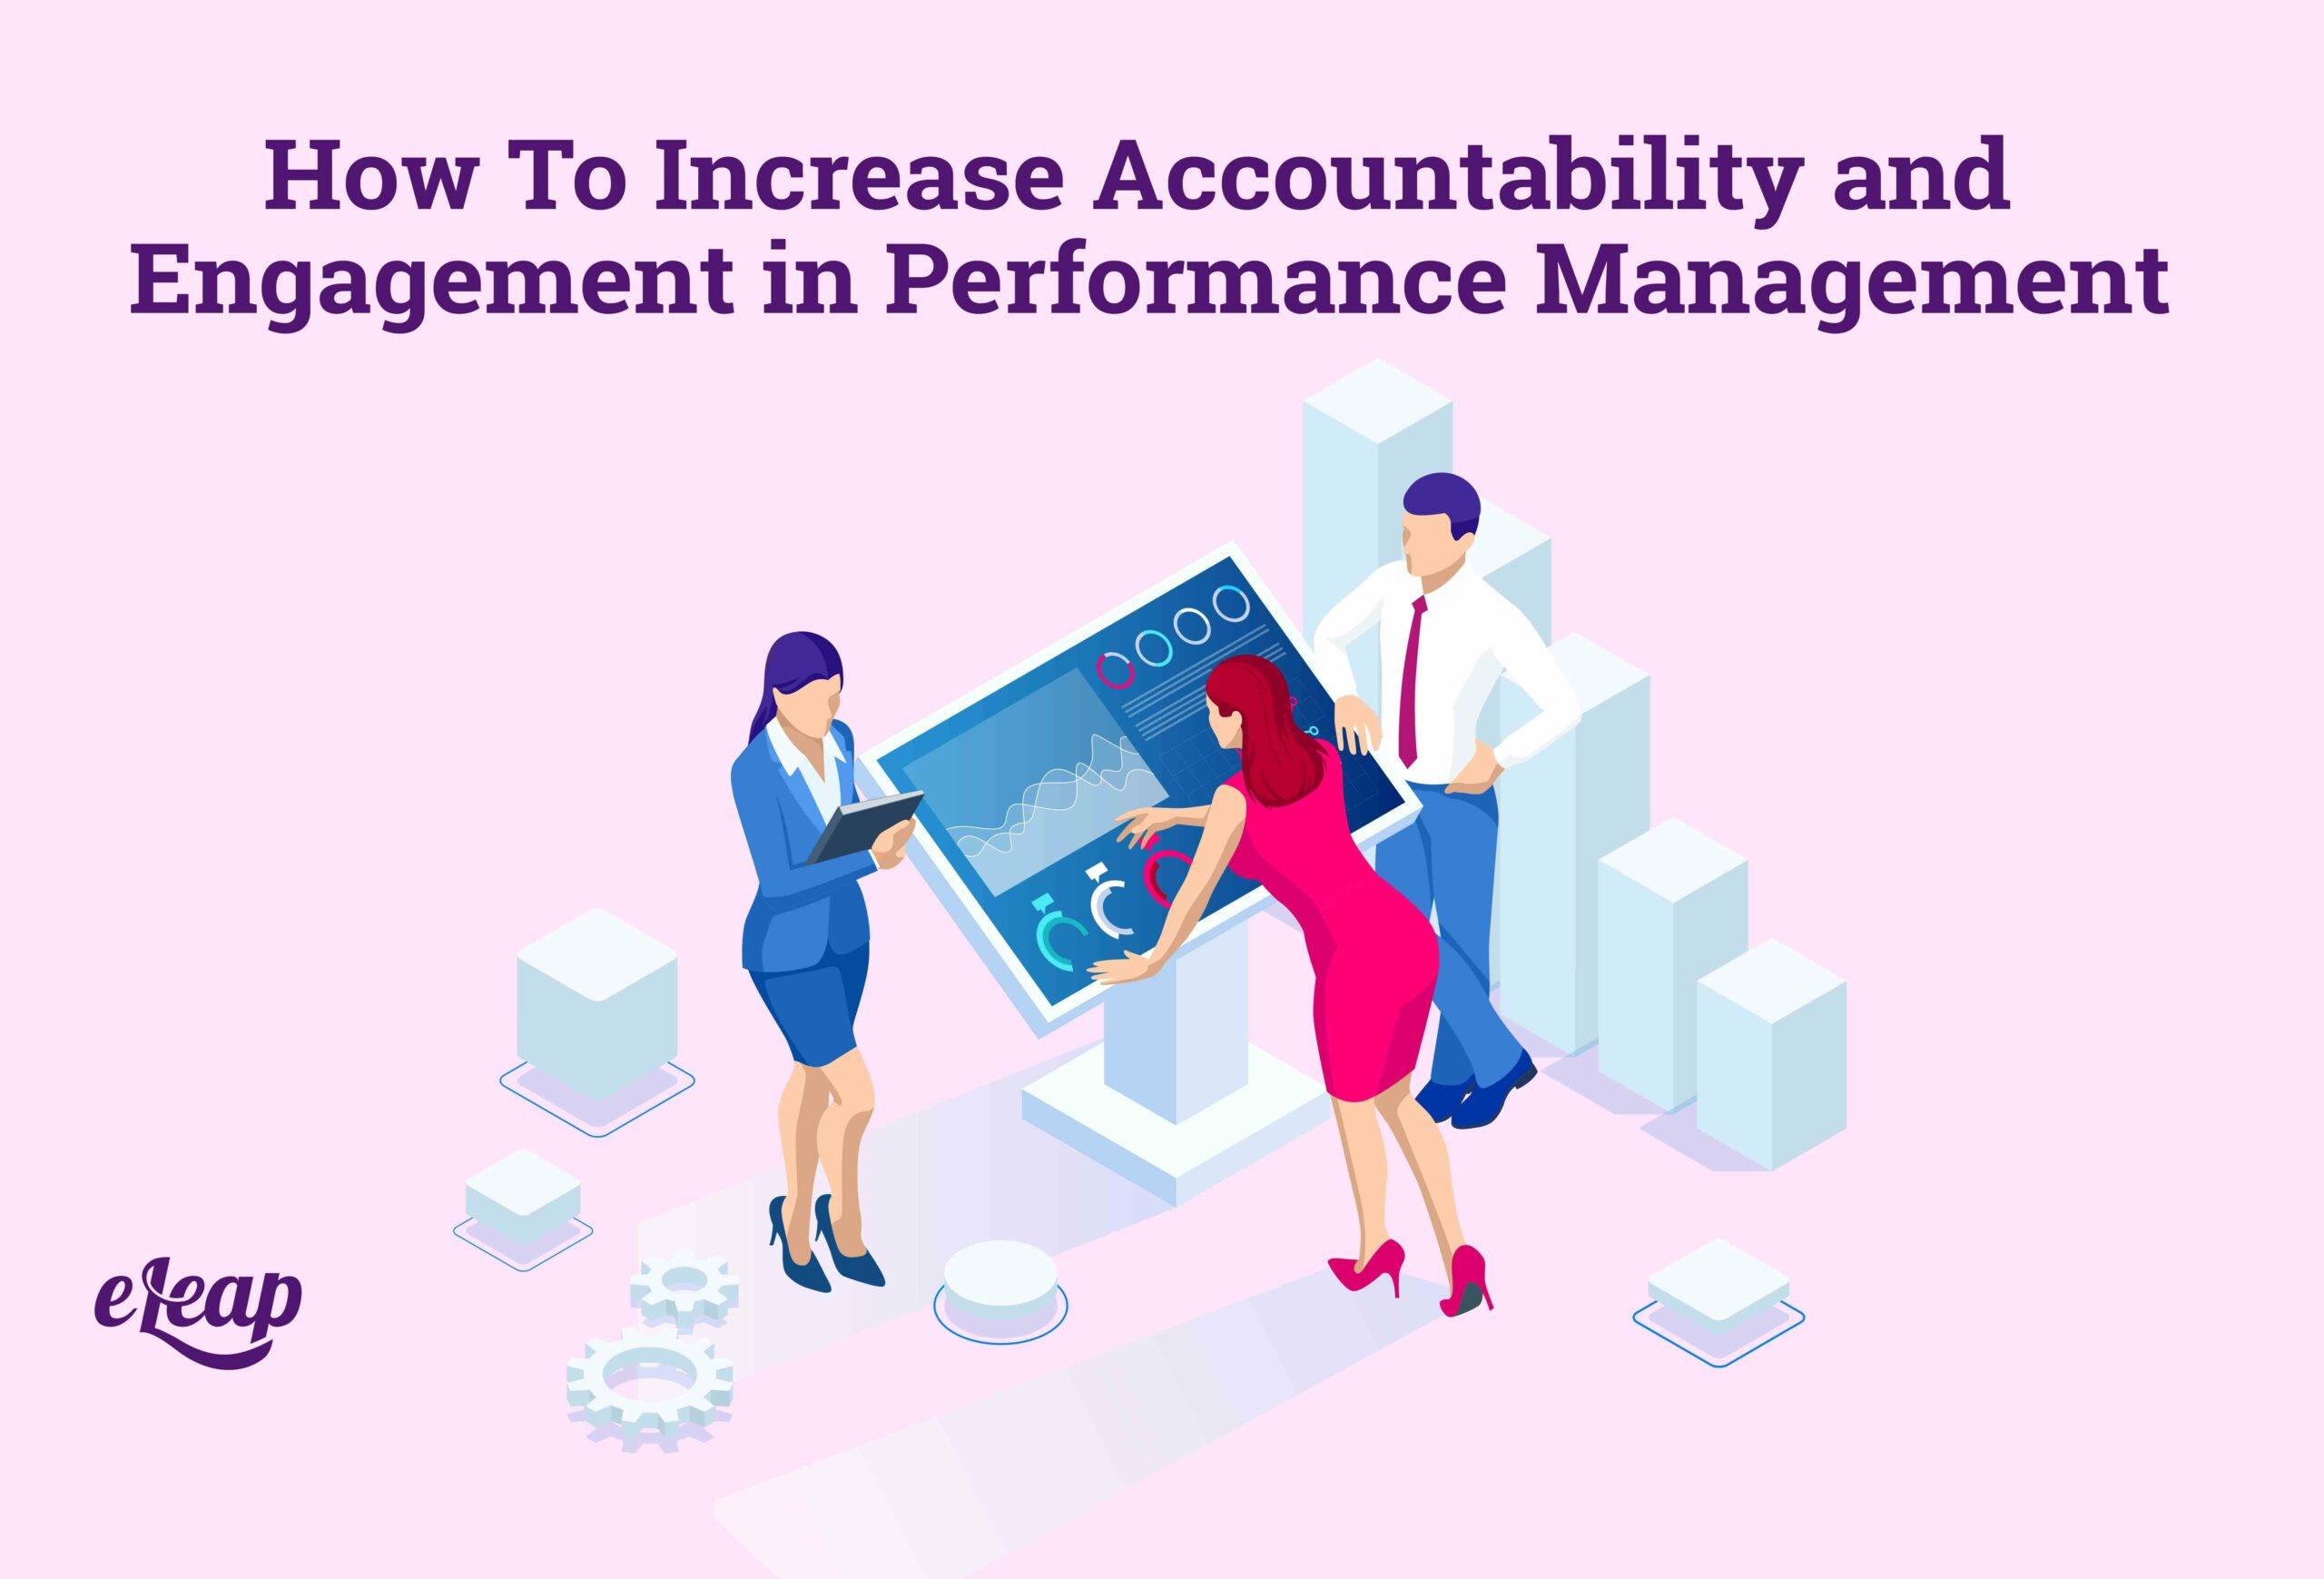 How To Increase Accountability and Engagement in Performance Management